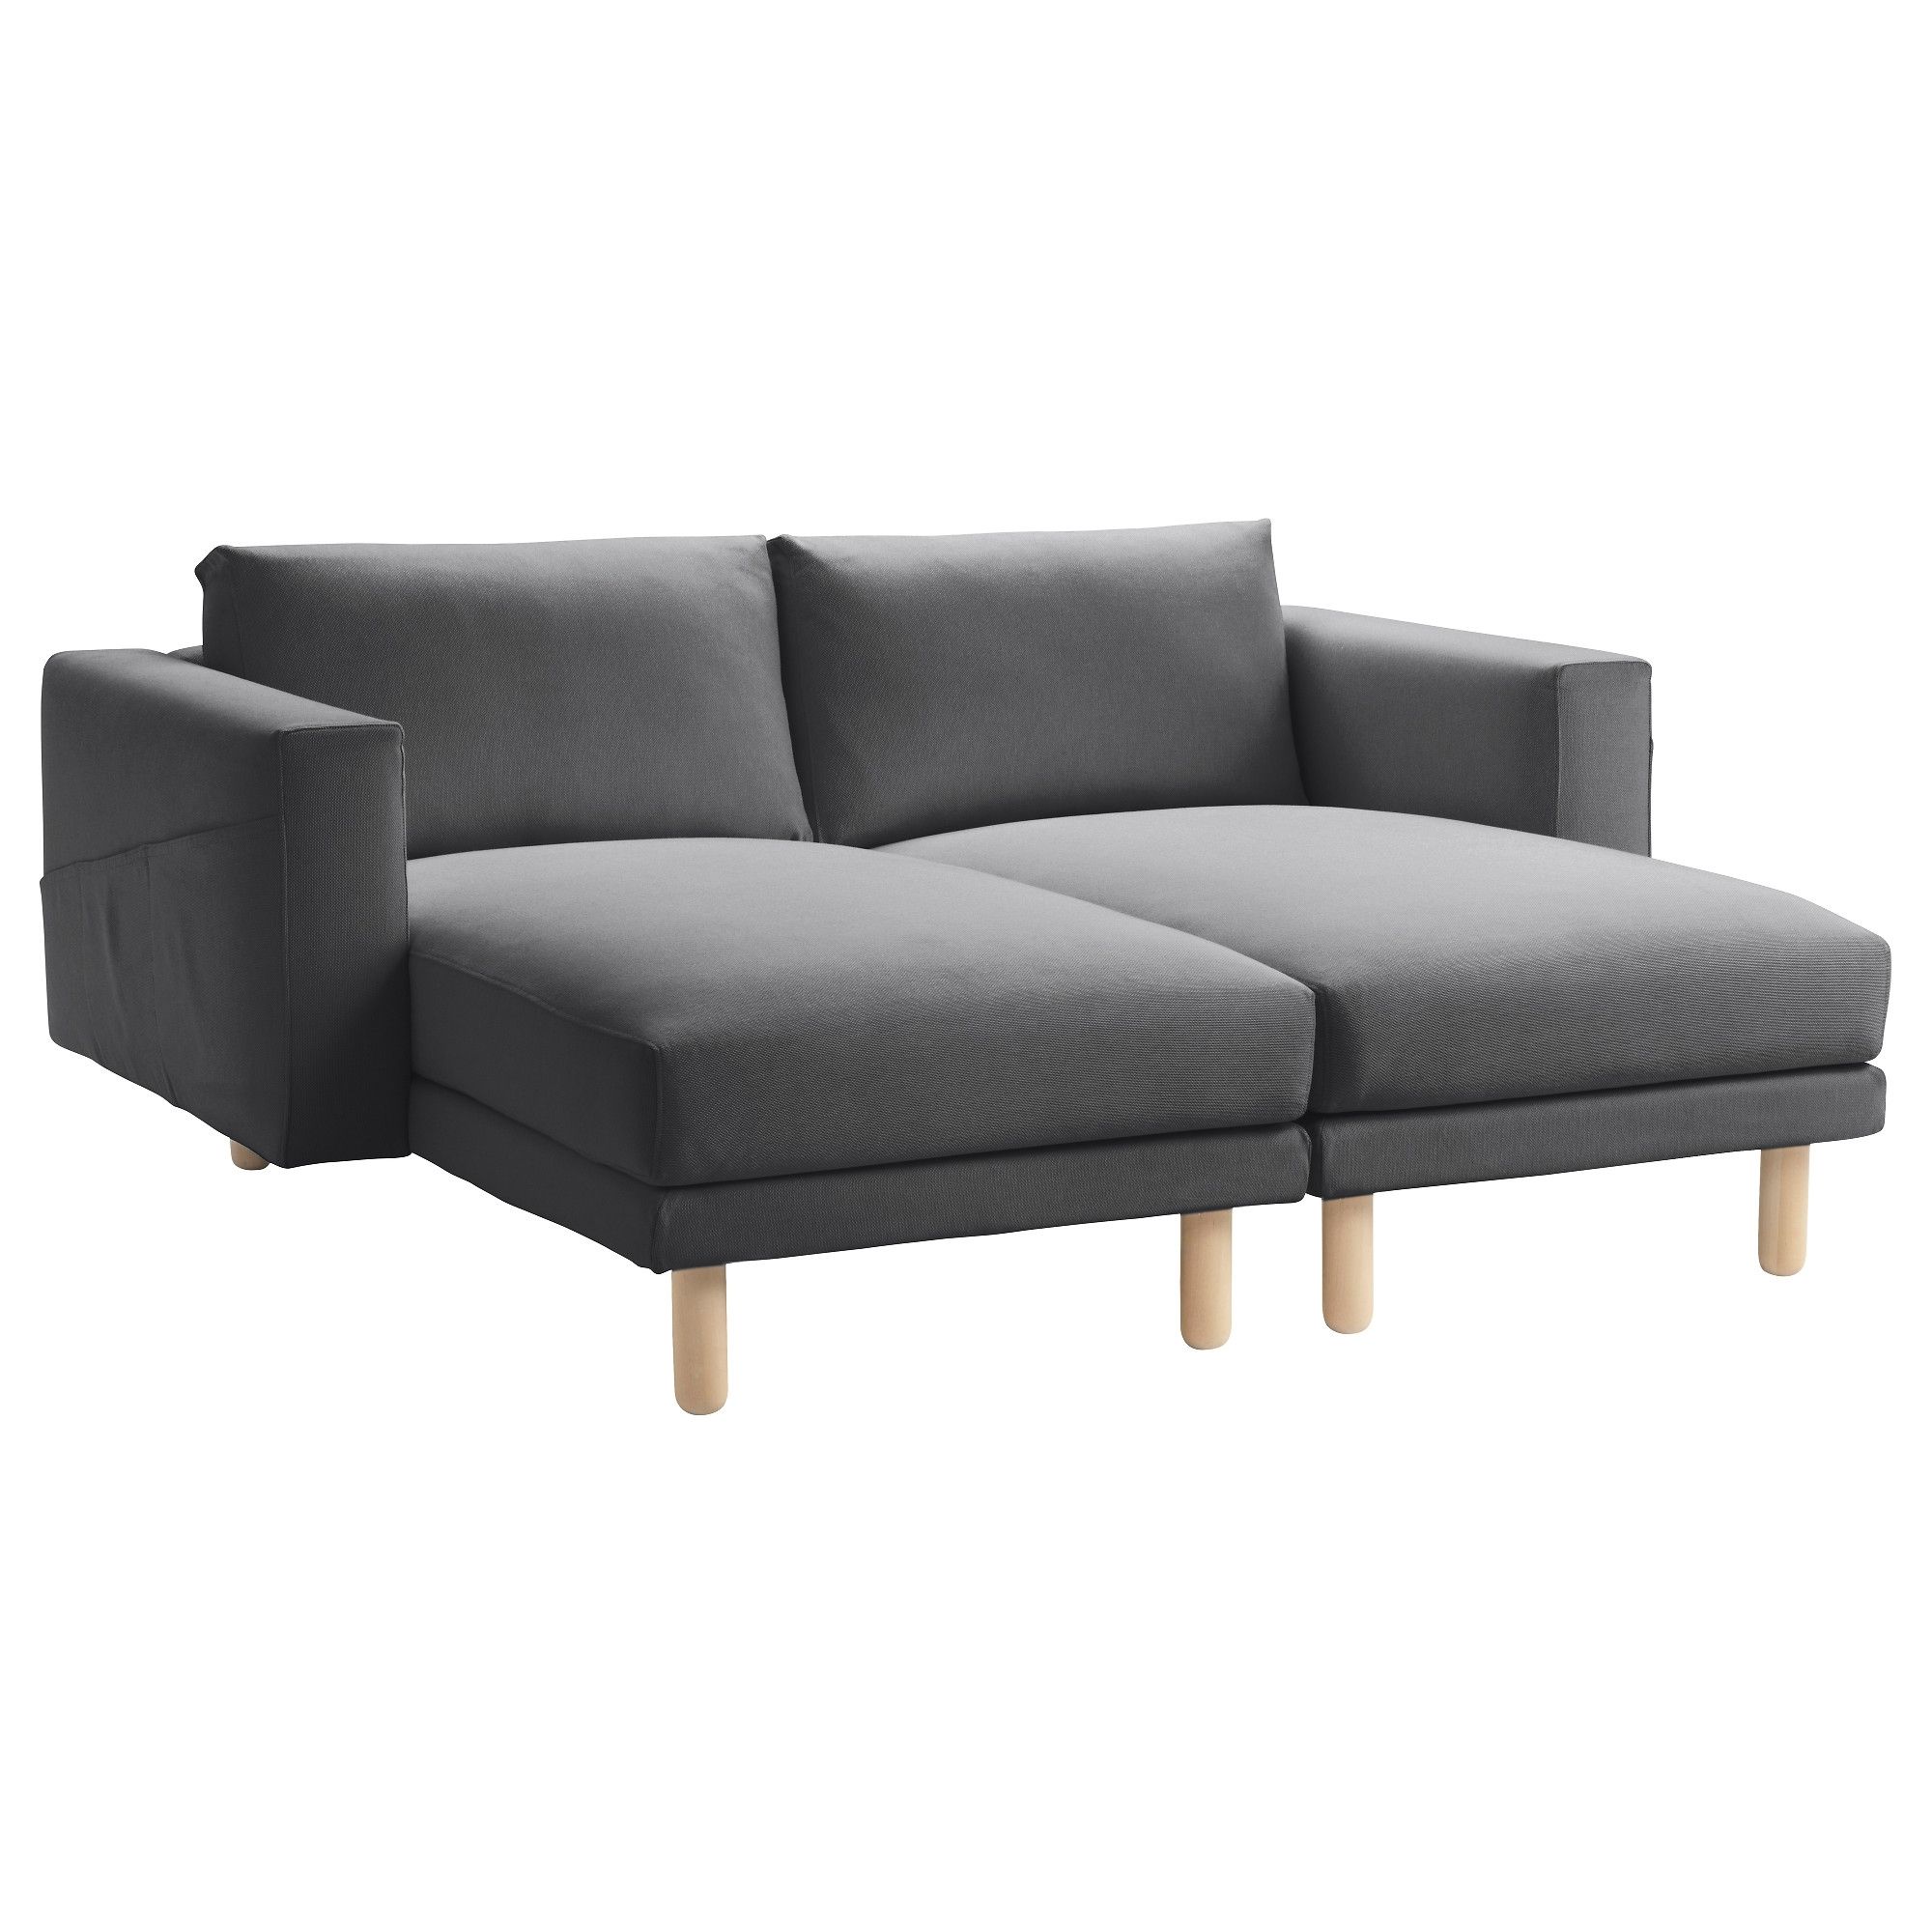 Norsborg Sectional, 2 Seat – Finnsta Dark Gray – Ikea Intended For 2017 Ikea Chaise Longues (View 14 of 15)